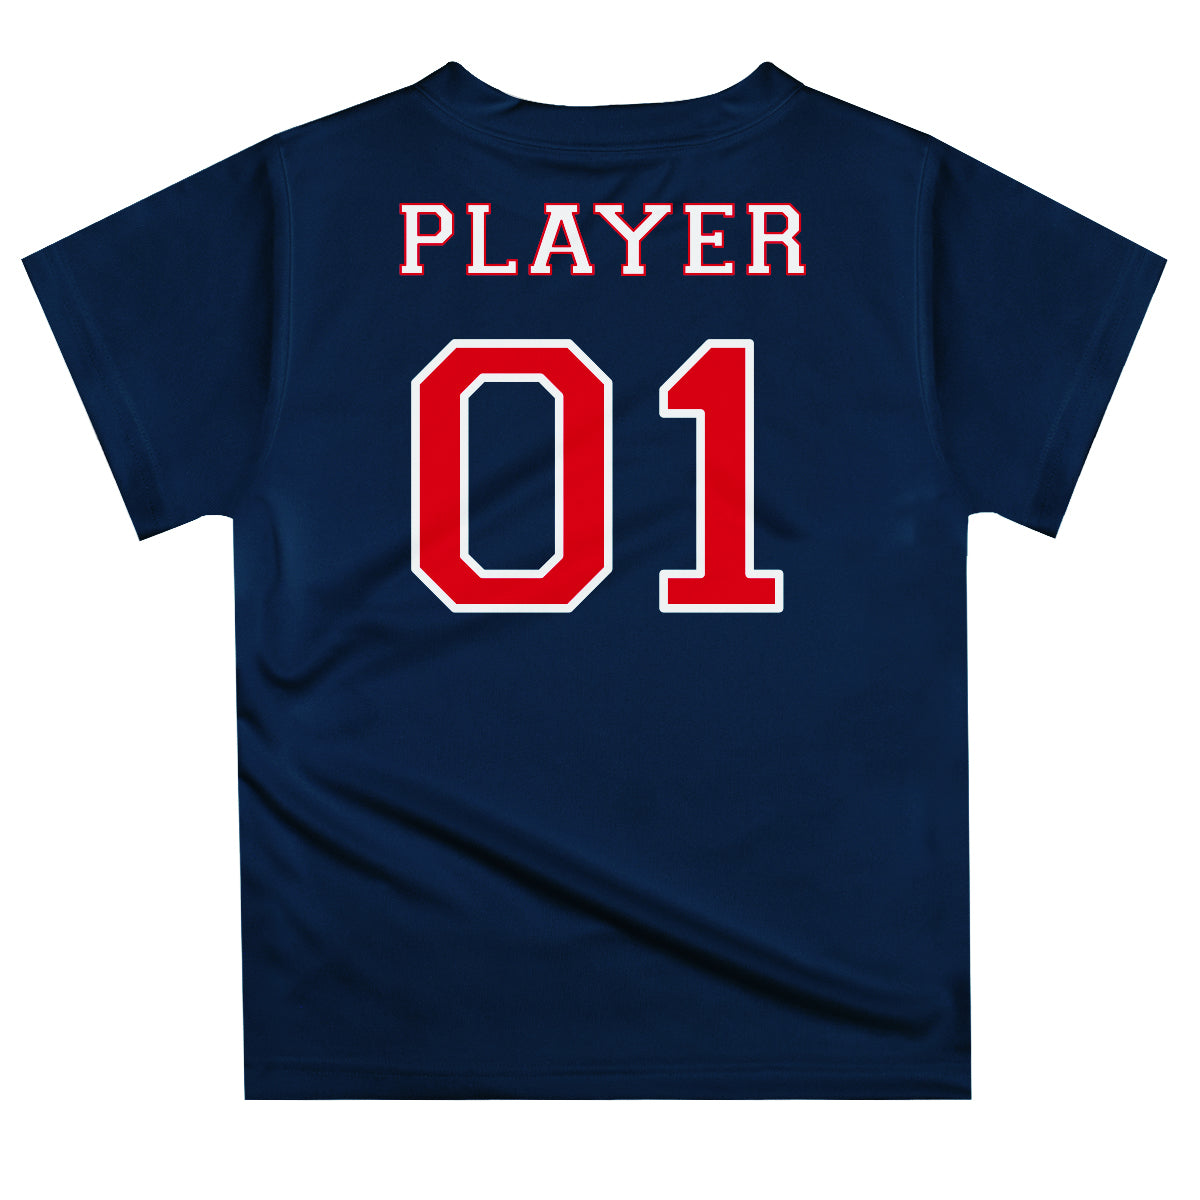 Baseball Personalized Name and Number Navy and Red Short Sleeve Tee Shirt - Wimziy&Co.